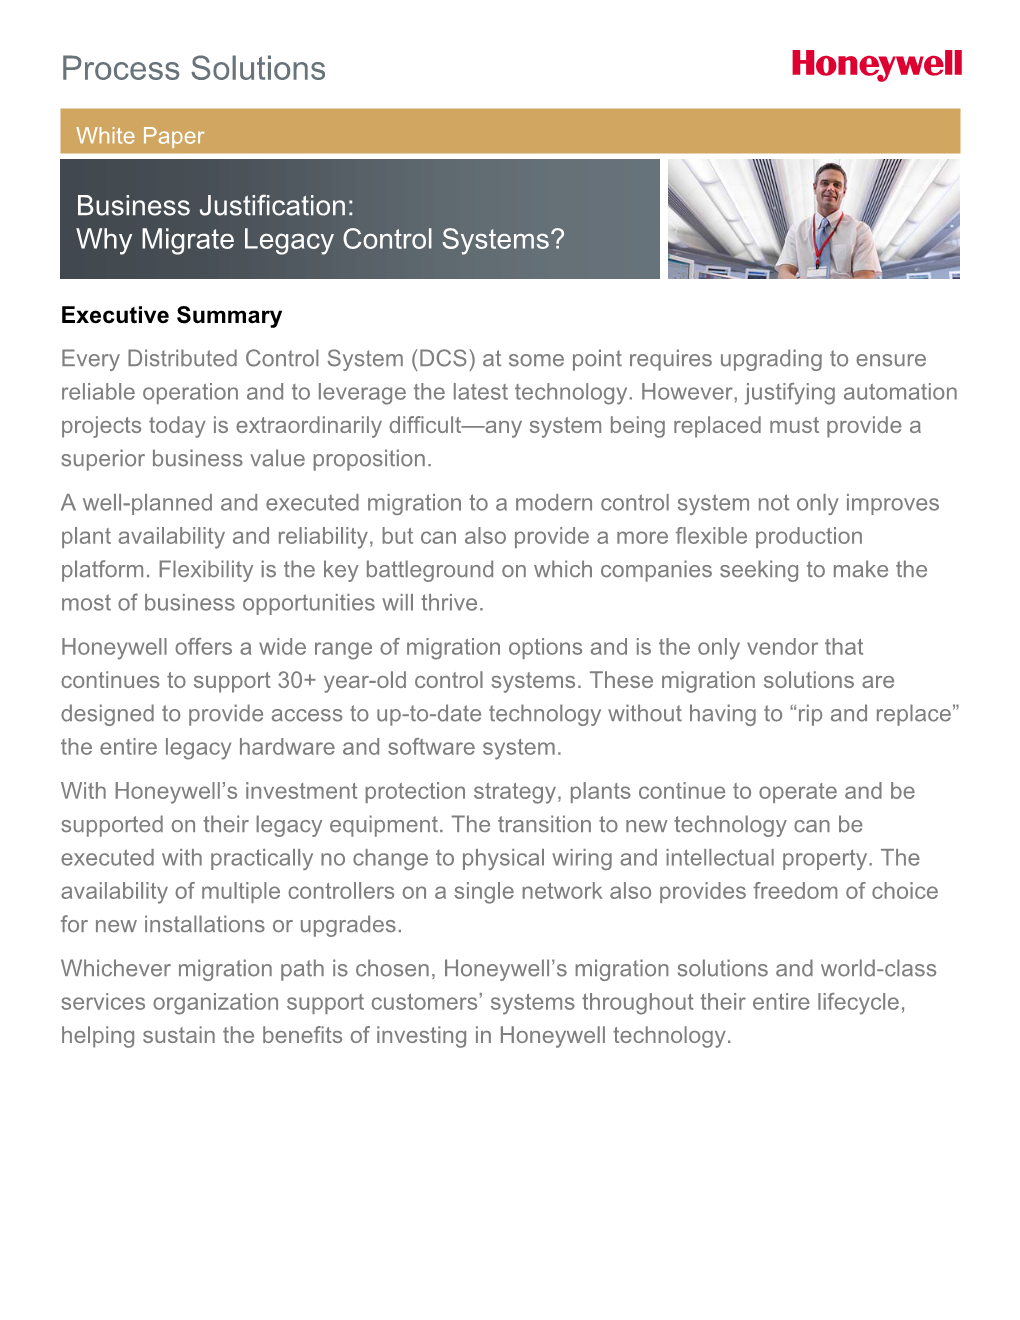 Business Justification: Why Migrate Legacy Control Systems?